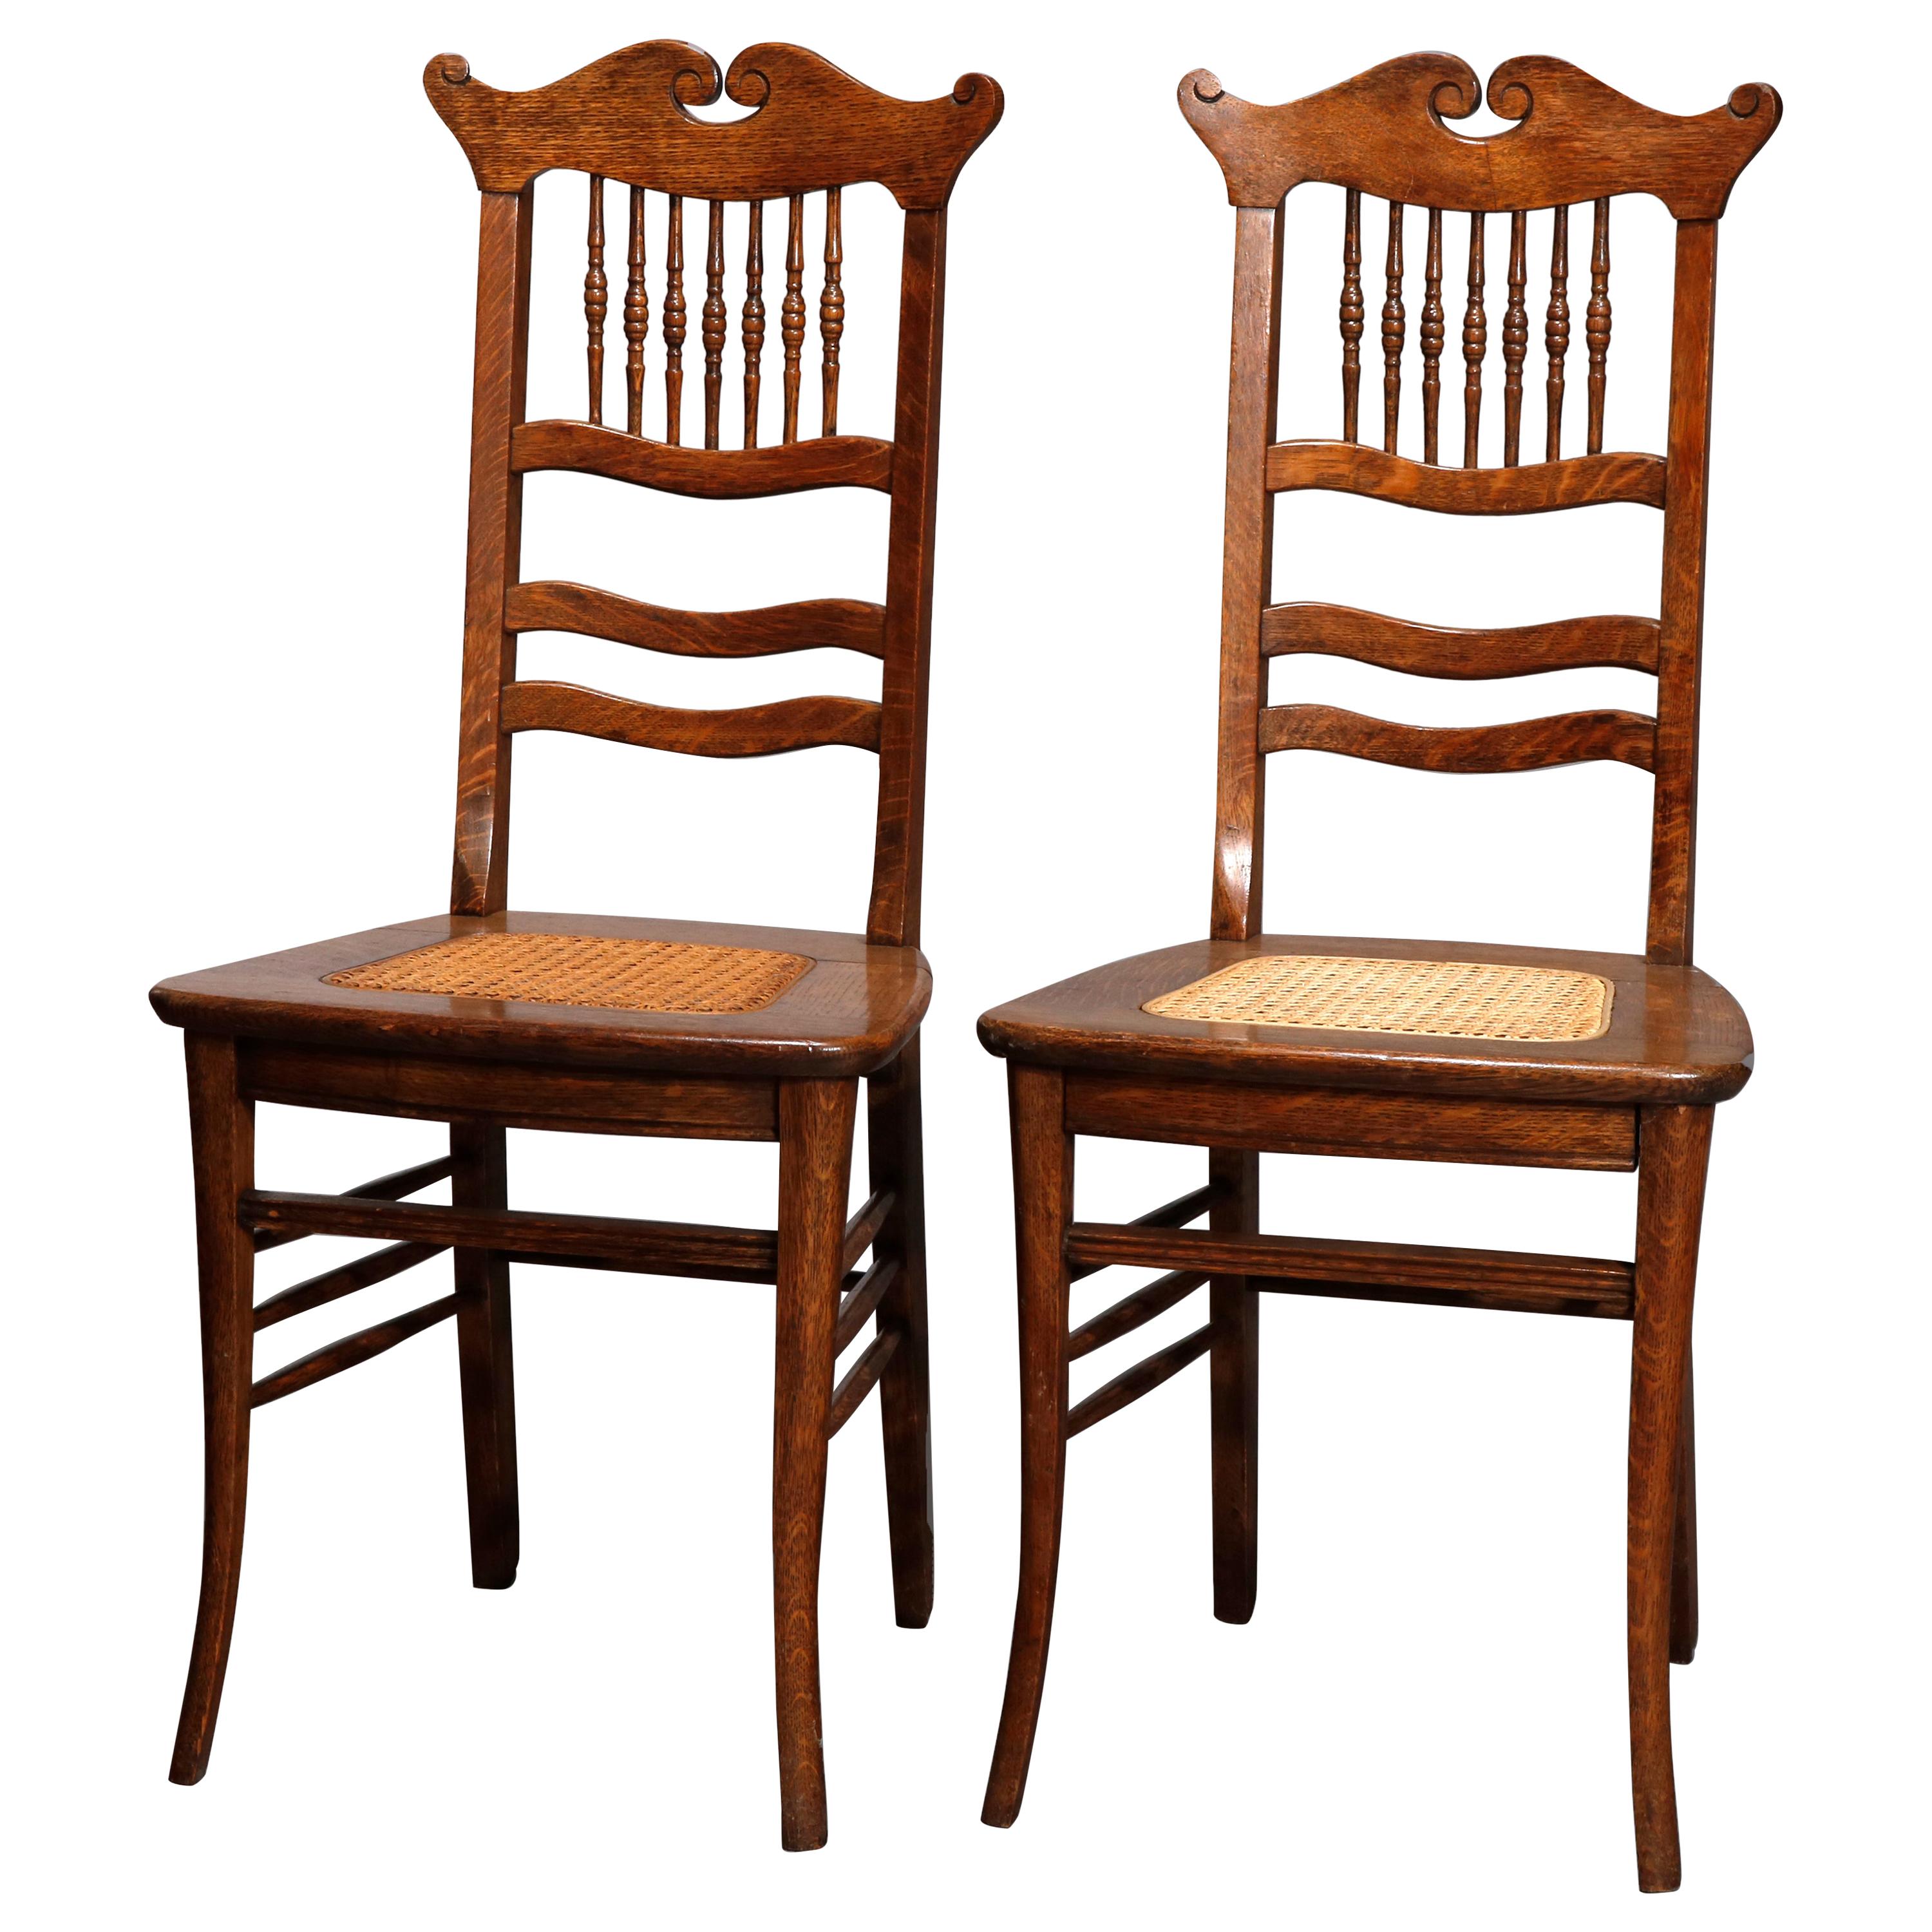 Antique Pair of Oak Spindle Back and Cane Seat Side Chairs, circa 1900